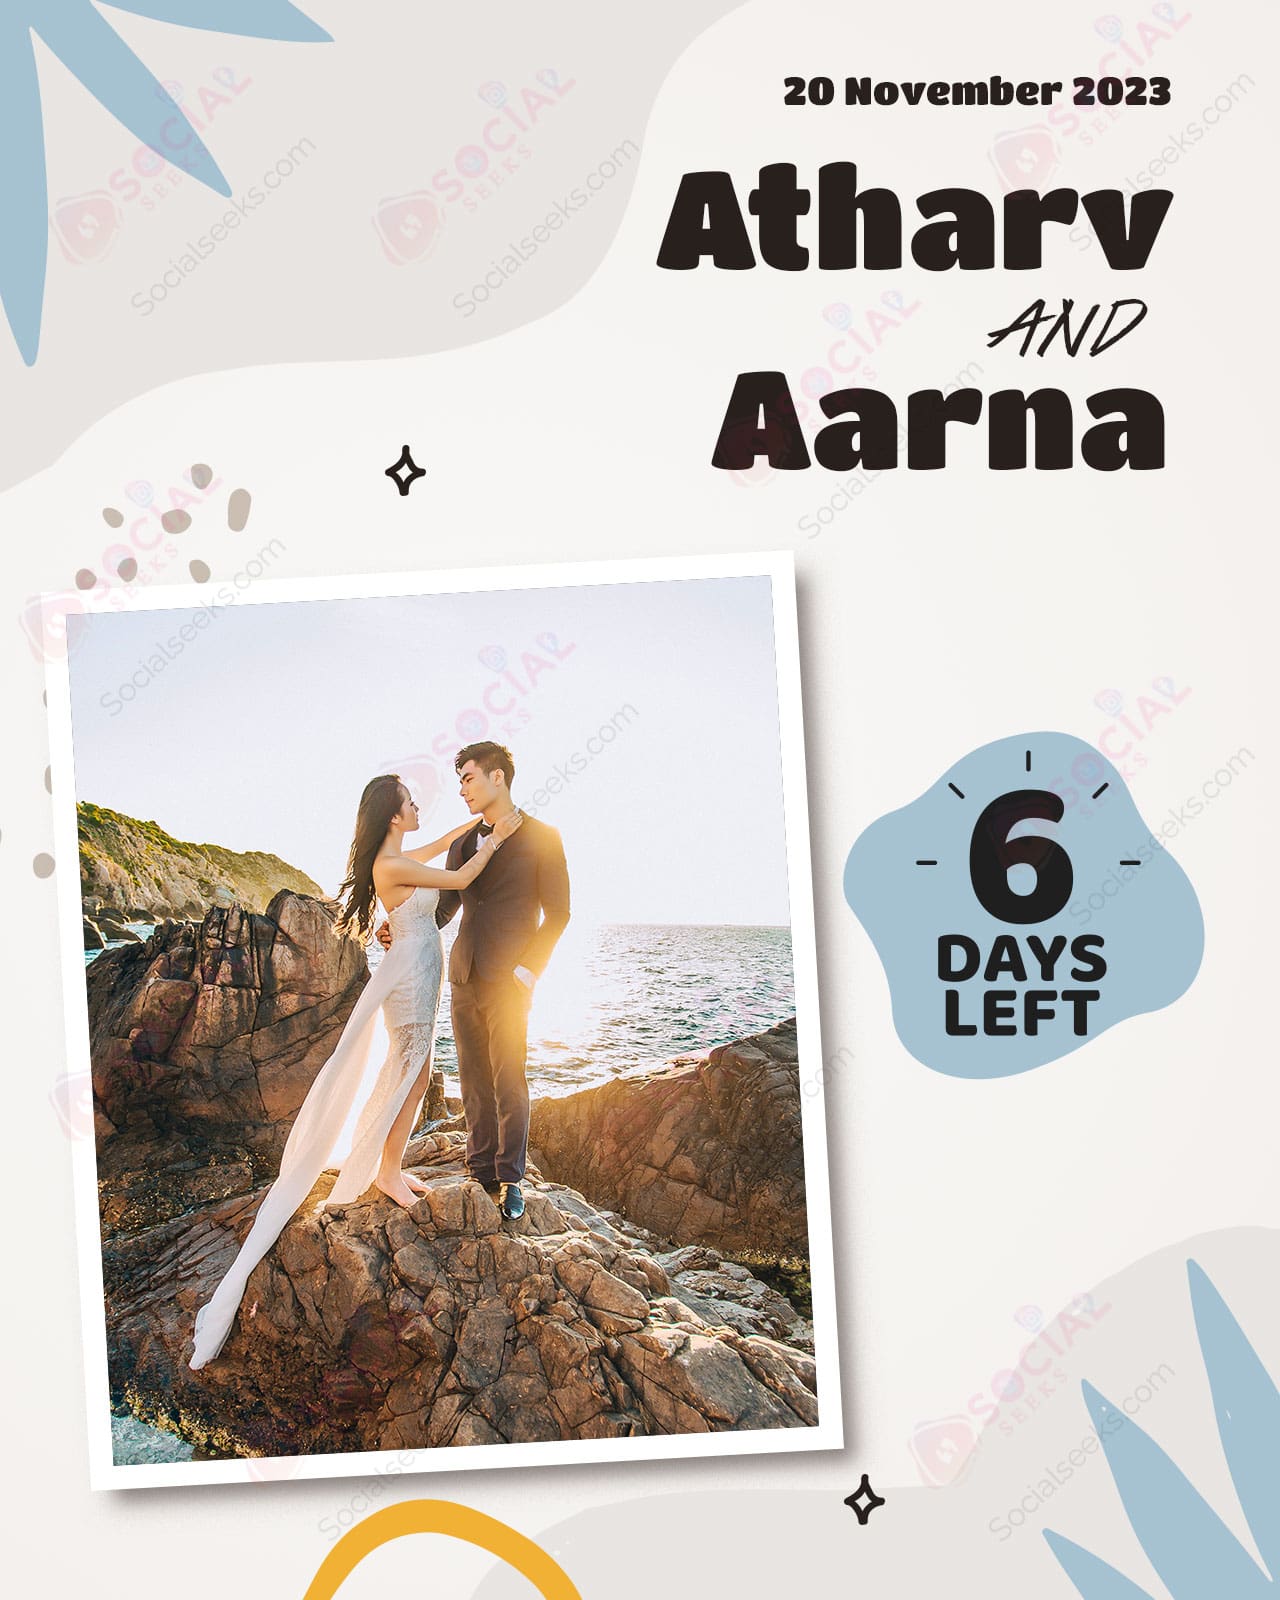 6 Days left marriage countdown photo frame with couple name